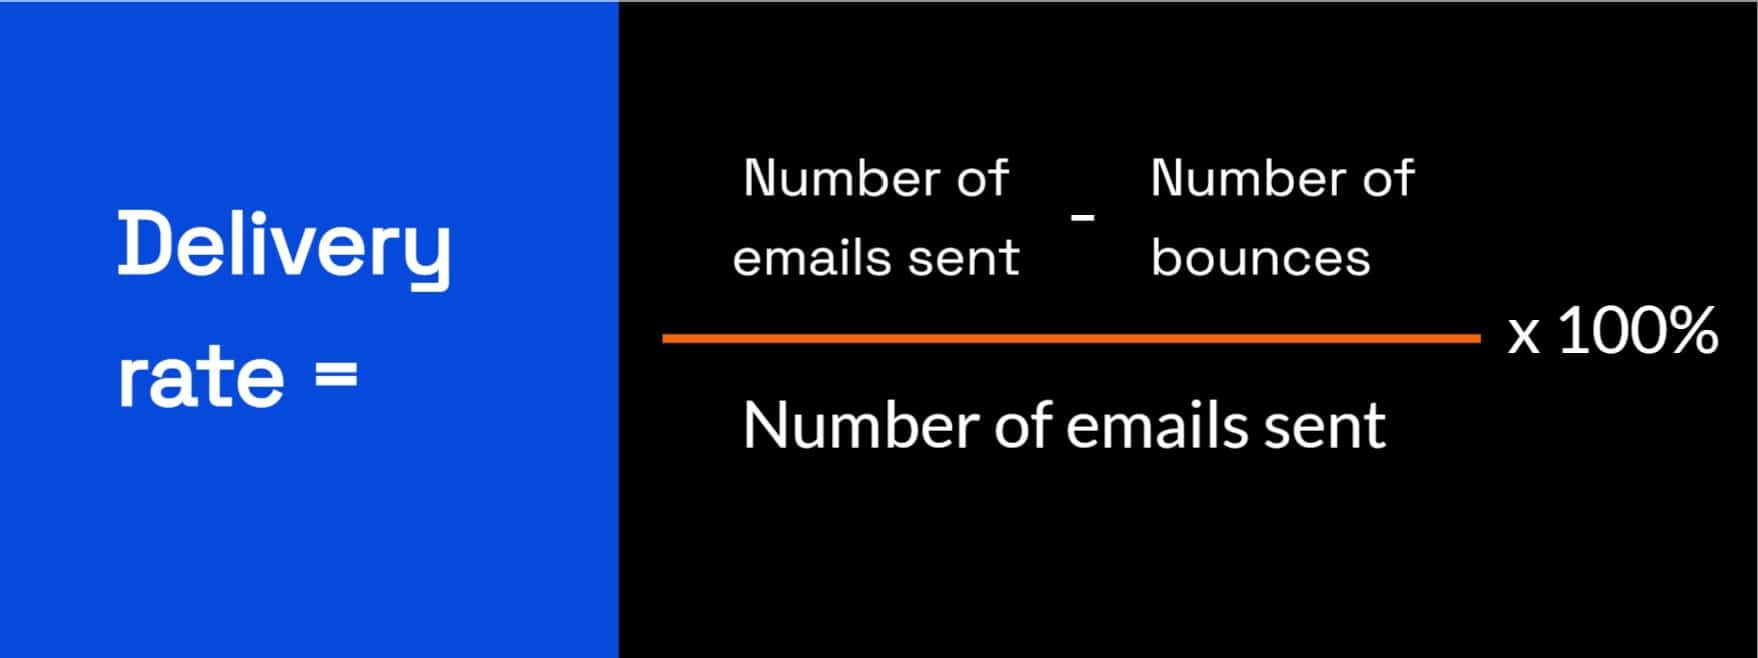 email metric delivery rate